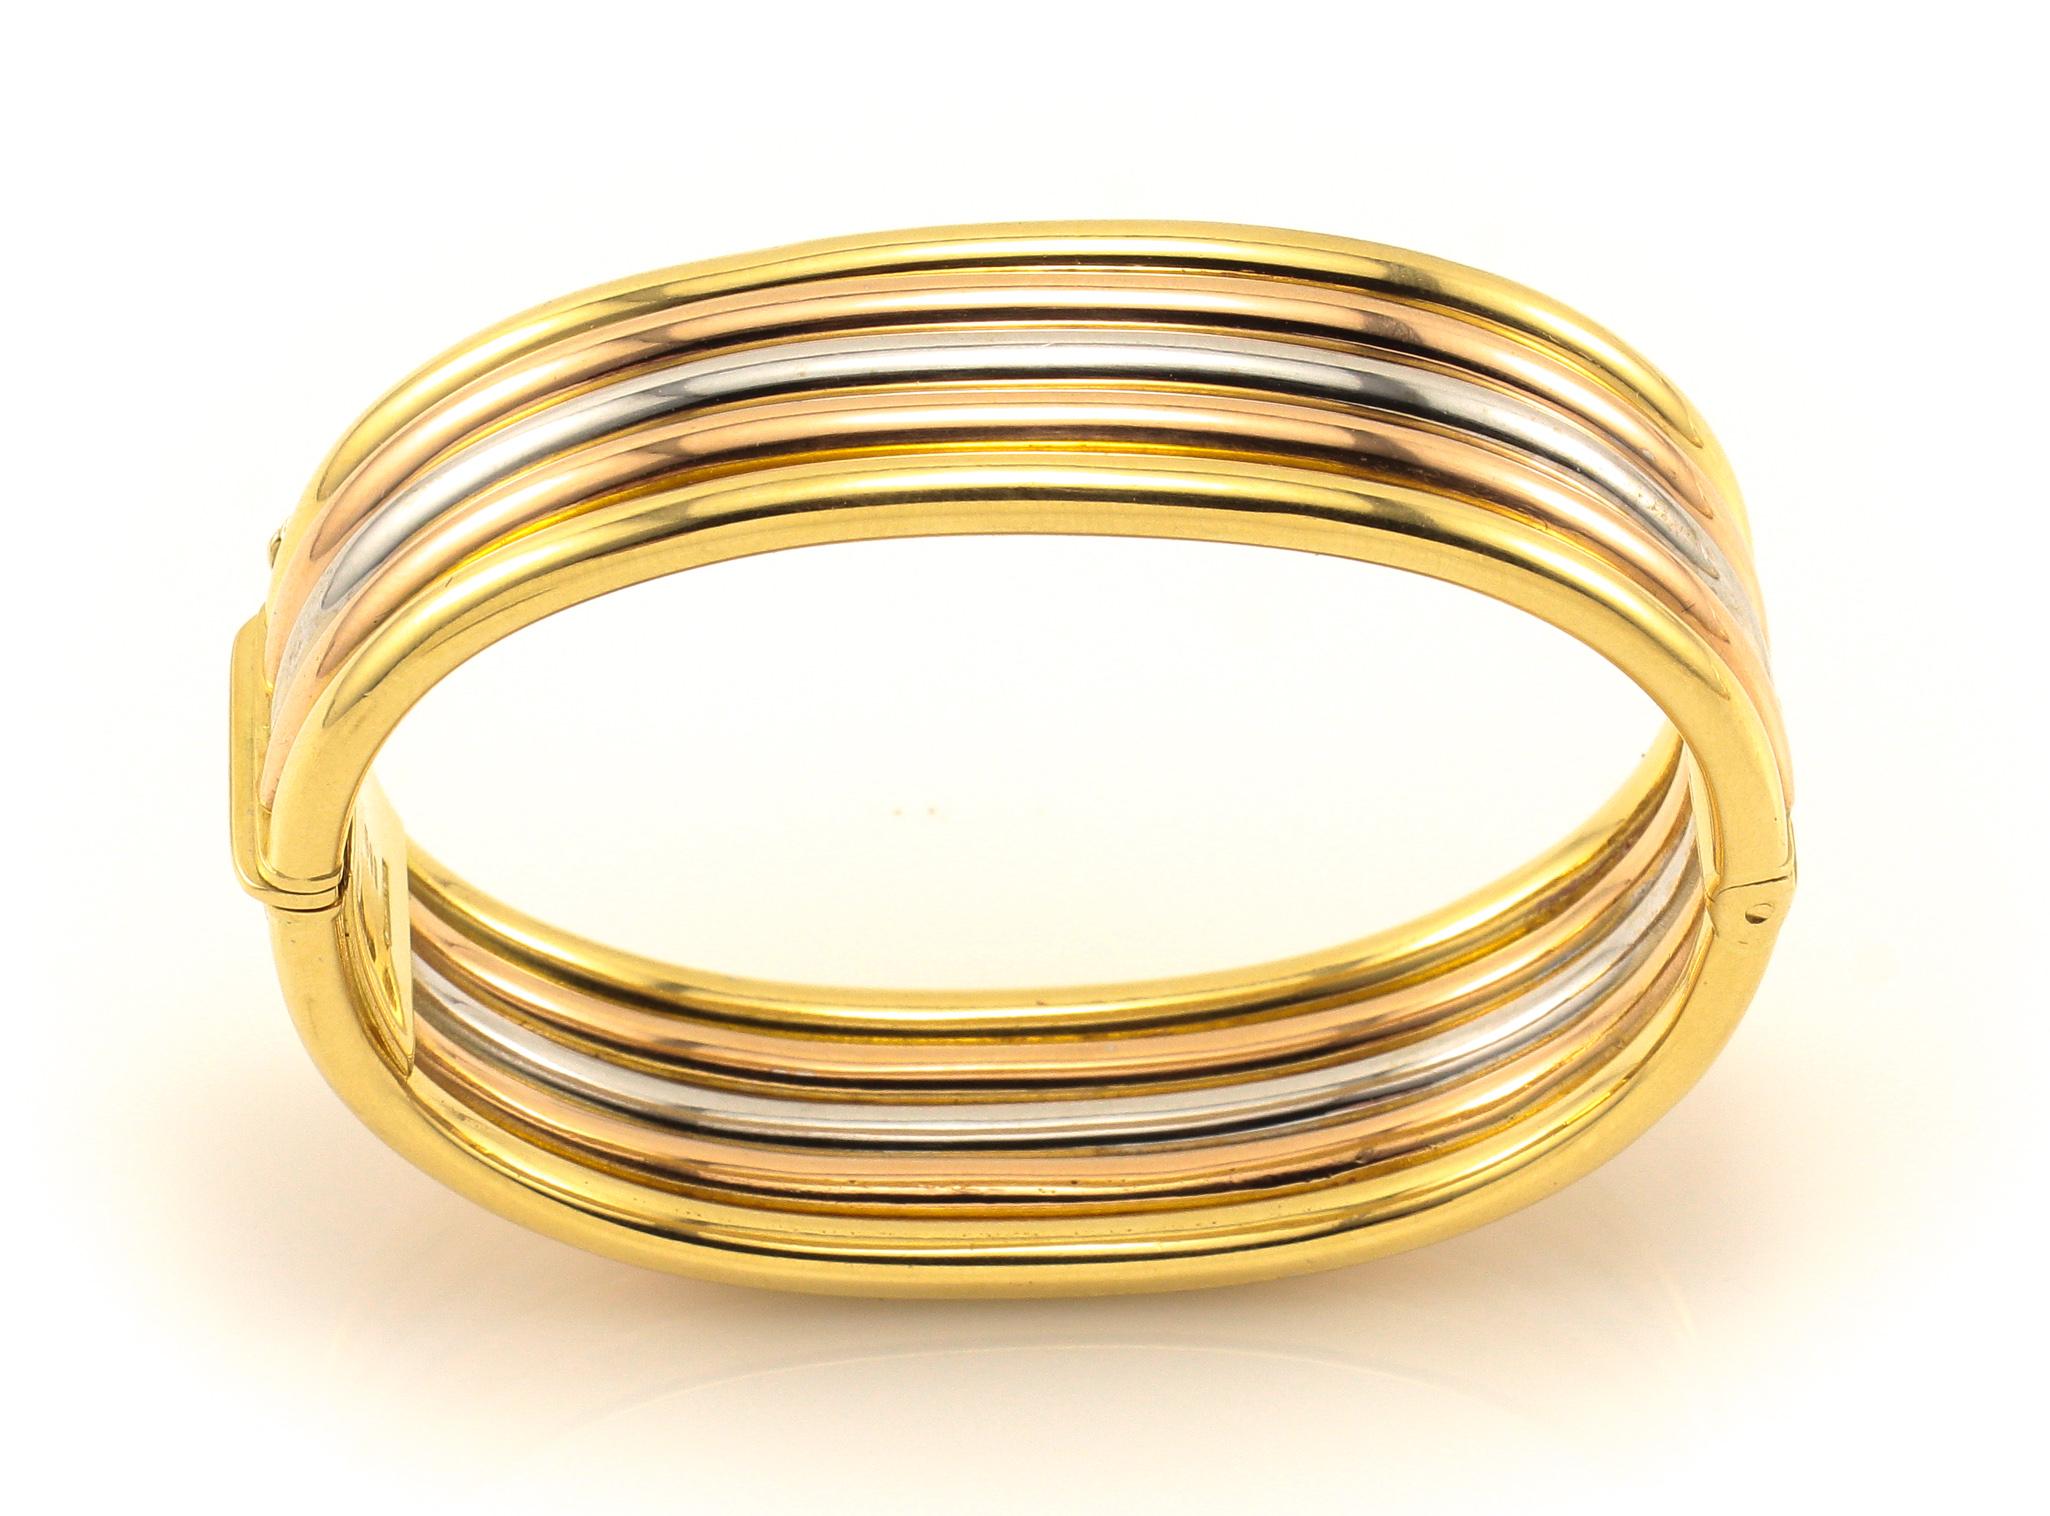 This is an alluring 18K Gold Bangle Bracelet. So unusual in it's design with 5 Rows of 18K Yellow, Rose and White Gold fabricated in a comfortable oval bangle that is almost 3/4 of an inch in width. The Bracelet is hinged for ease in wearing and is